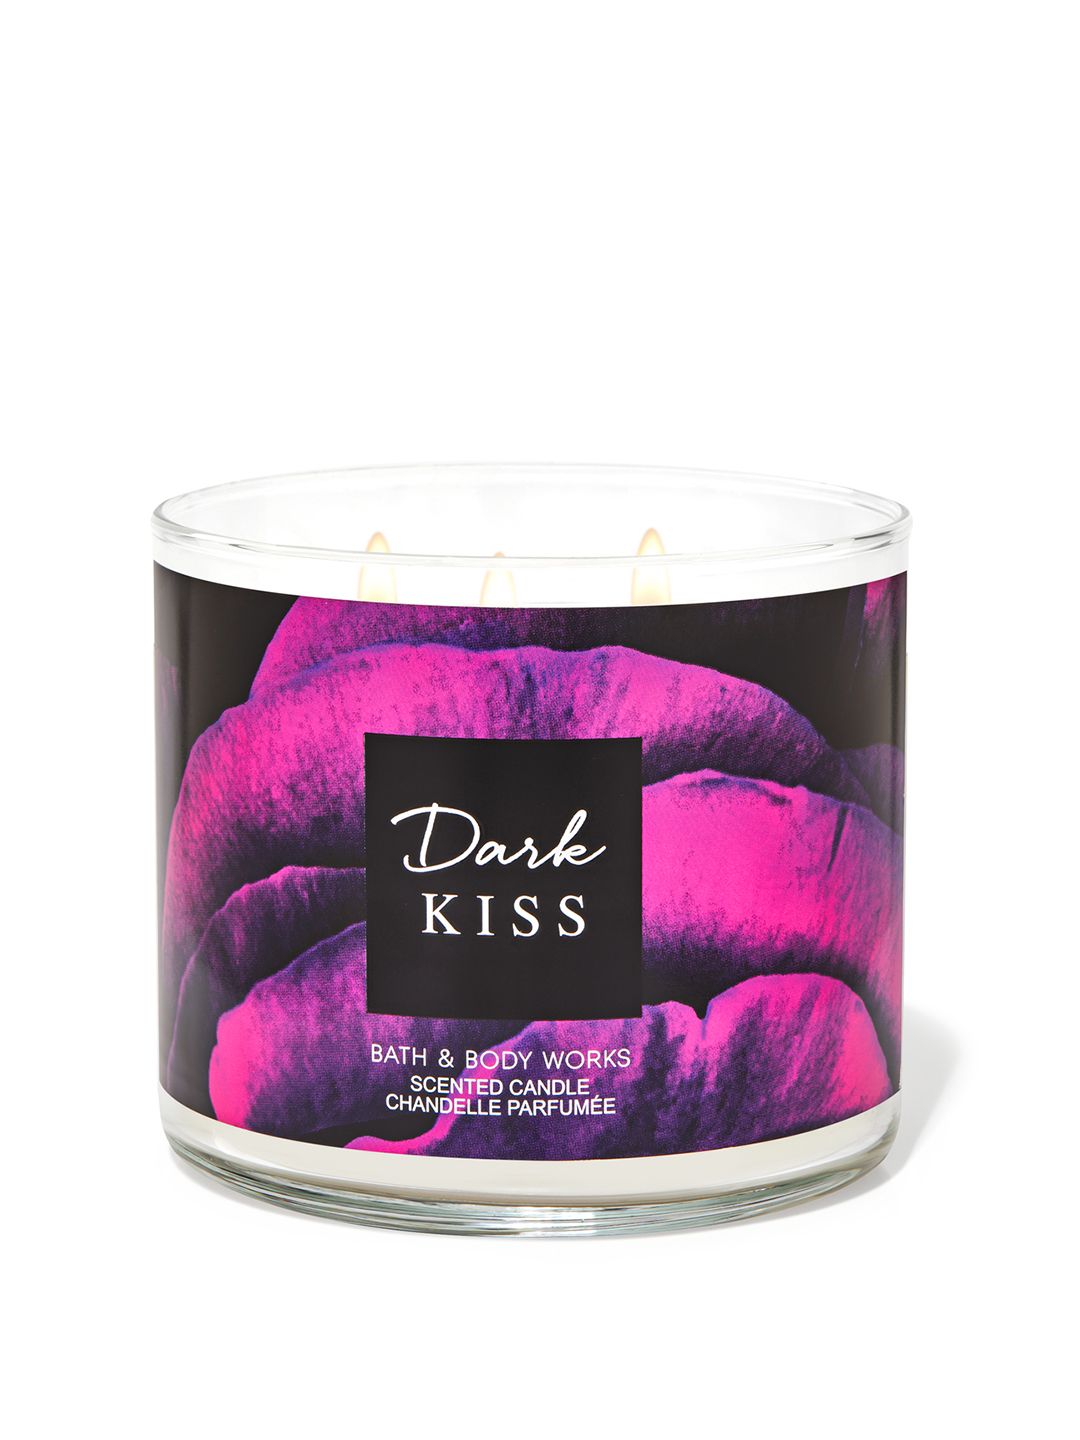 Bath & Body Works Dark Kiss 3-Wick Scented Candle with Natural Essential Oils - 411g Price in India